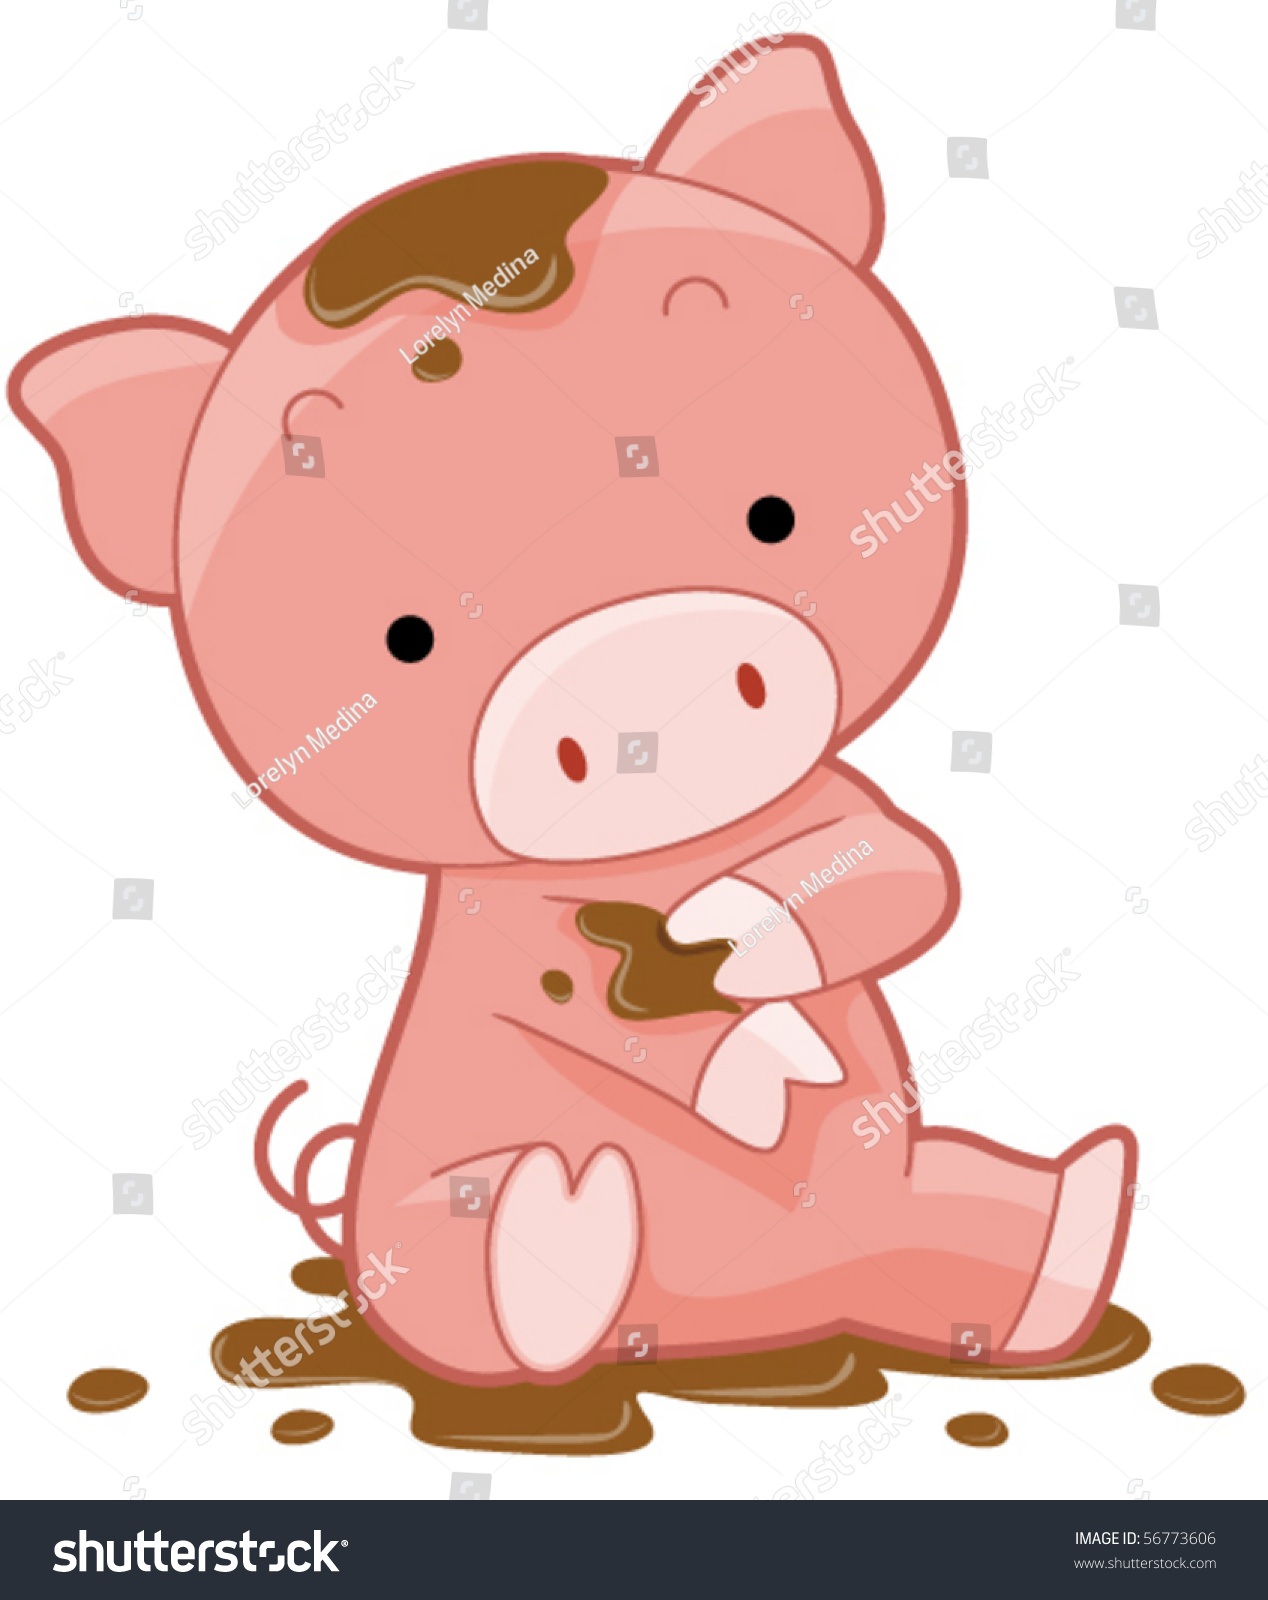 clipart pig in mud - photo #44